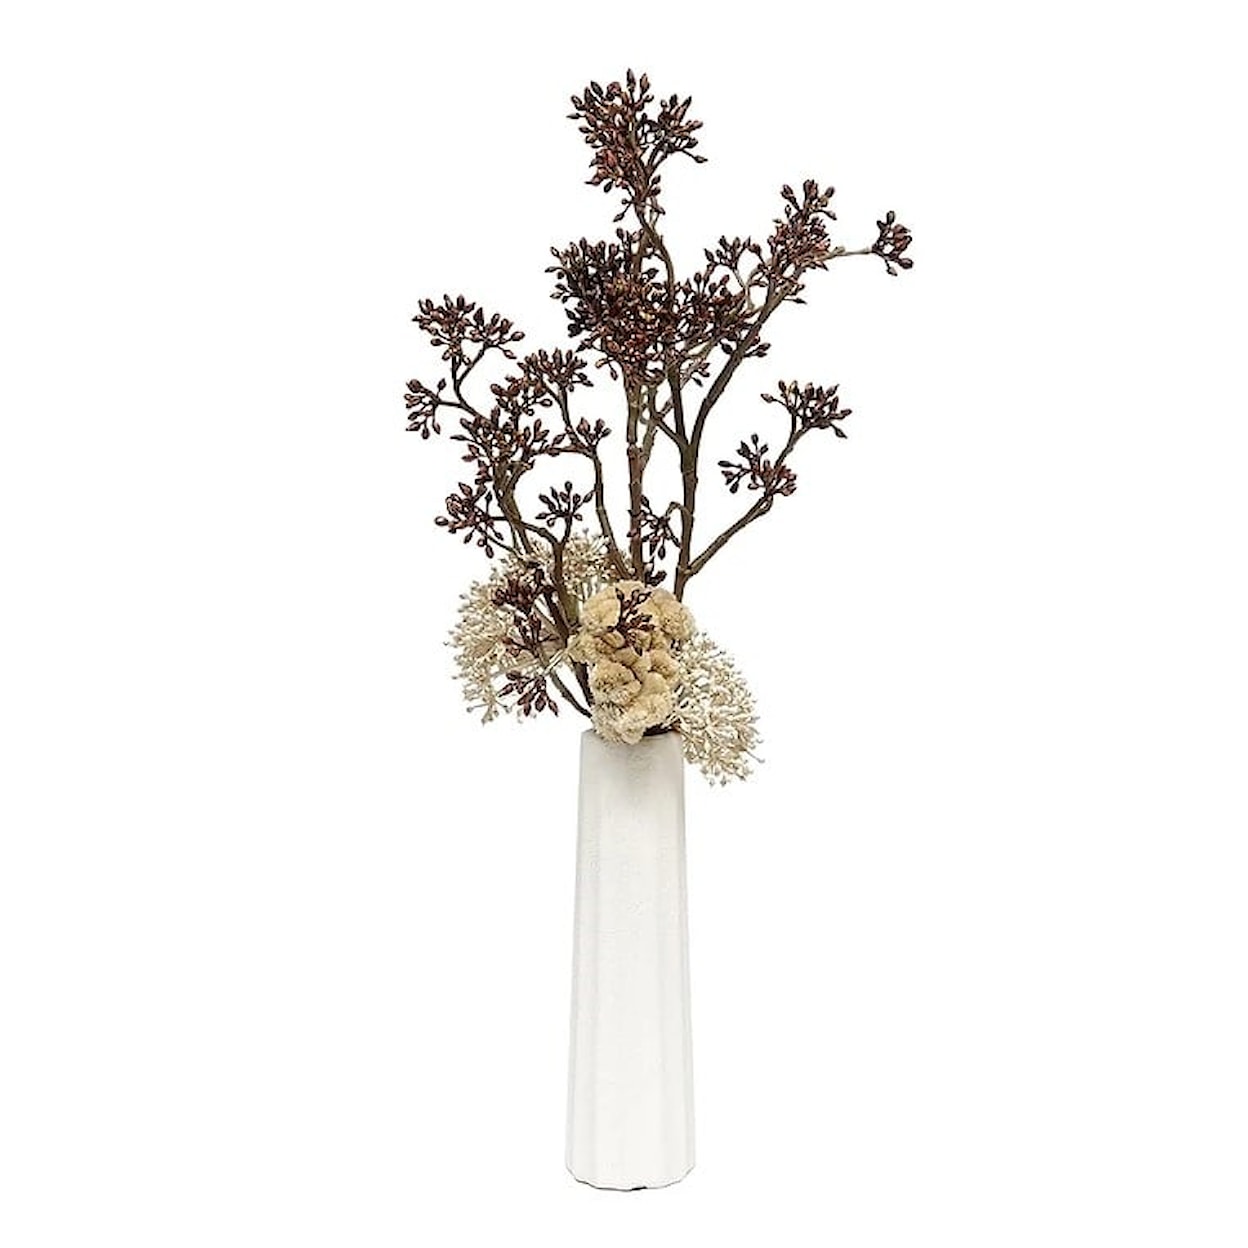 The Ivy Guild Florals Tall Fluted Vase w/ Brown/Beige Skimmia